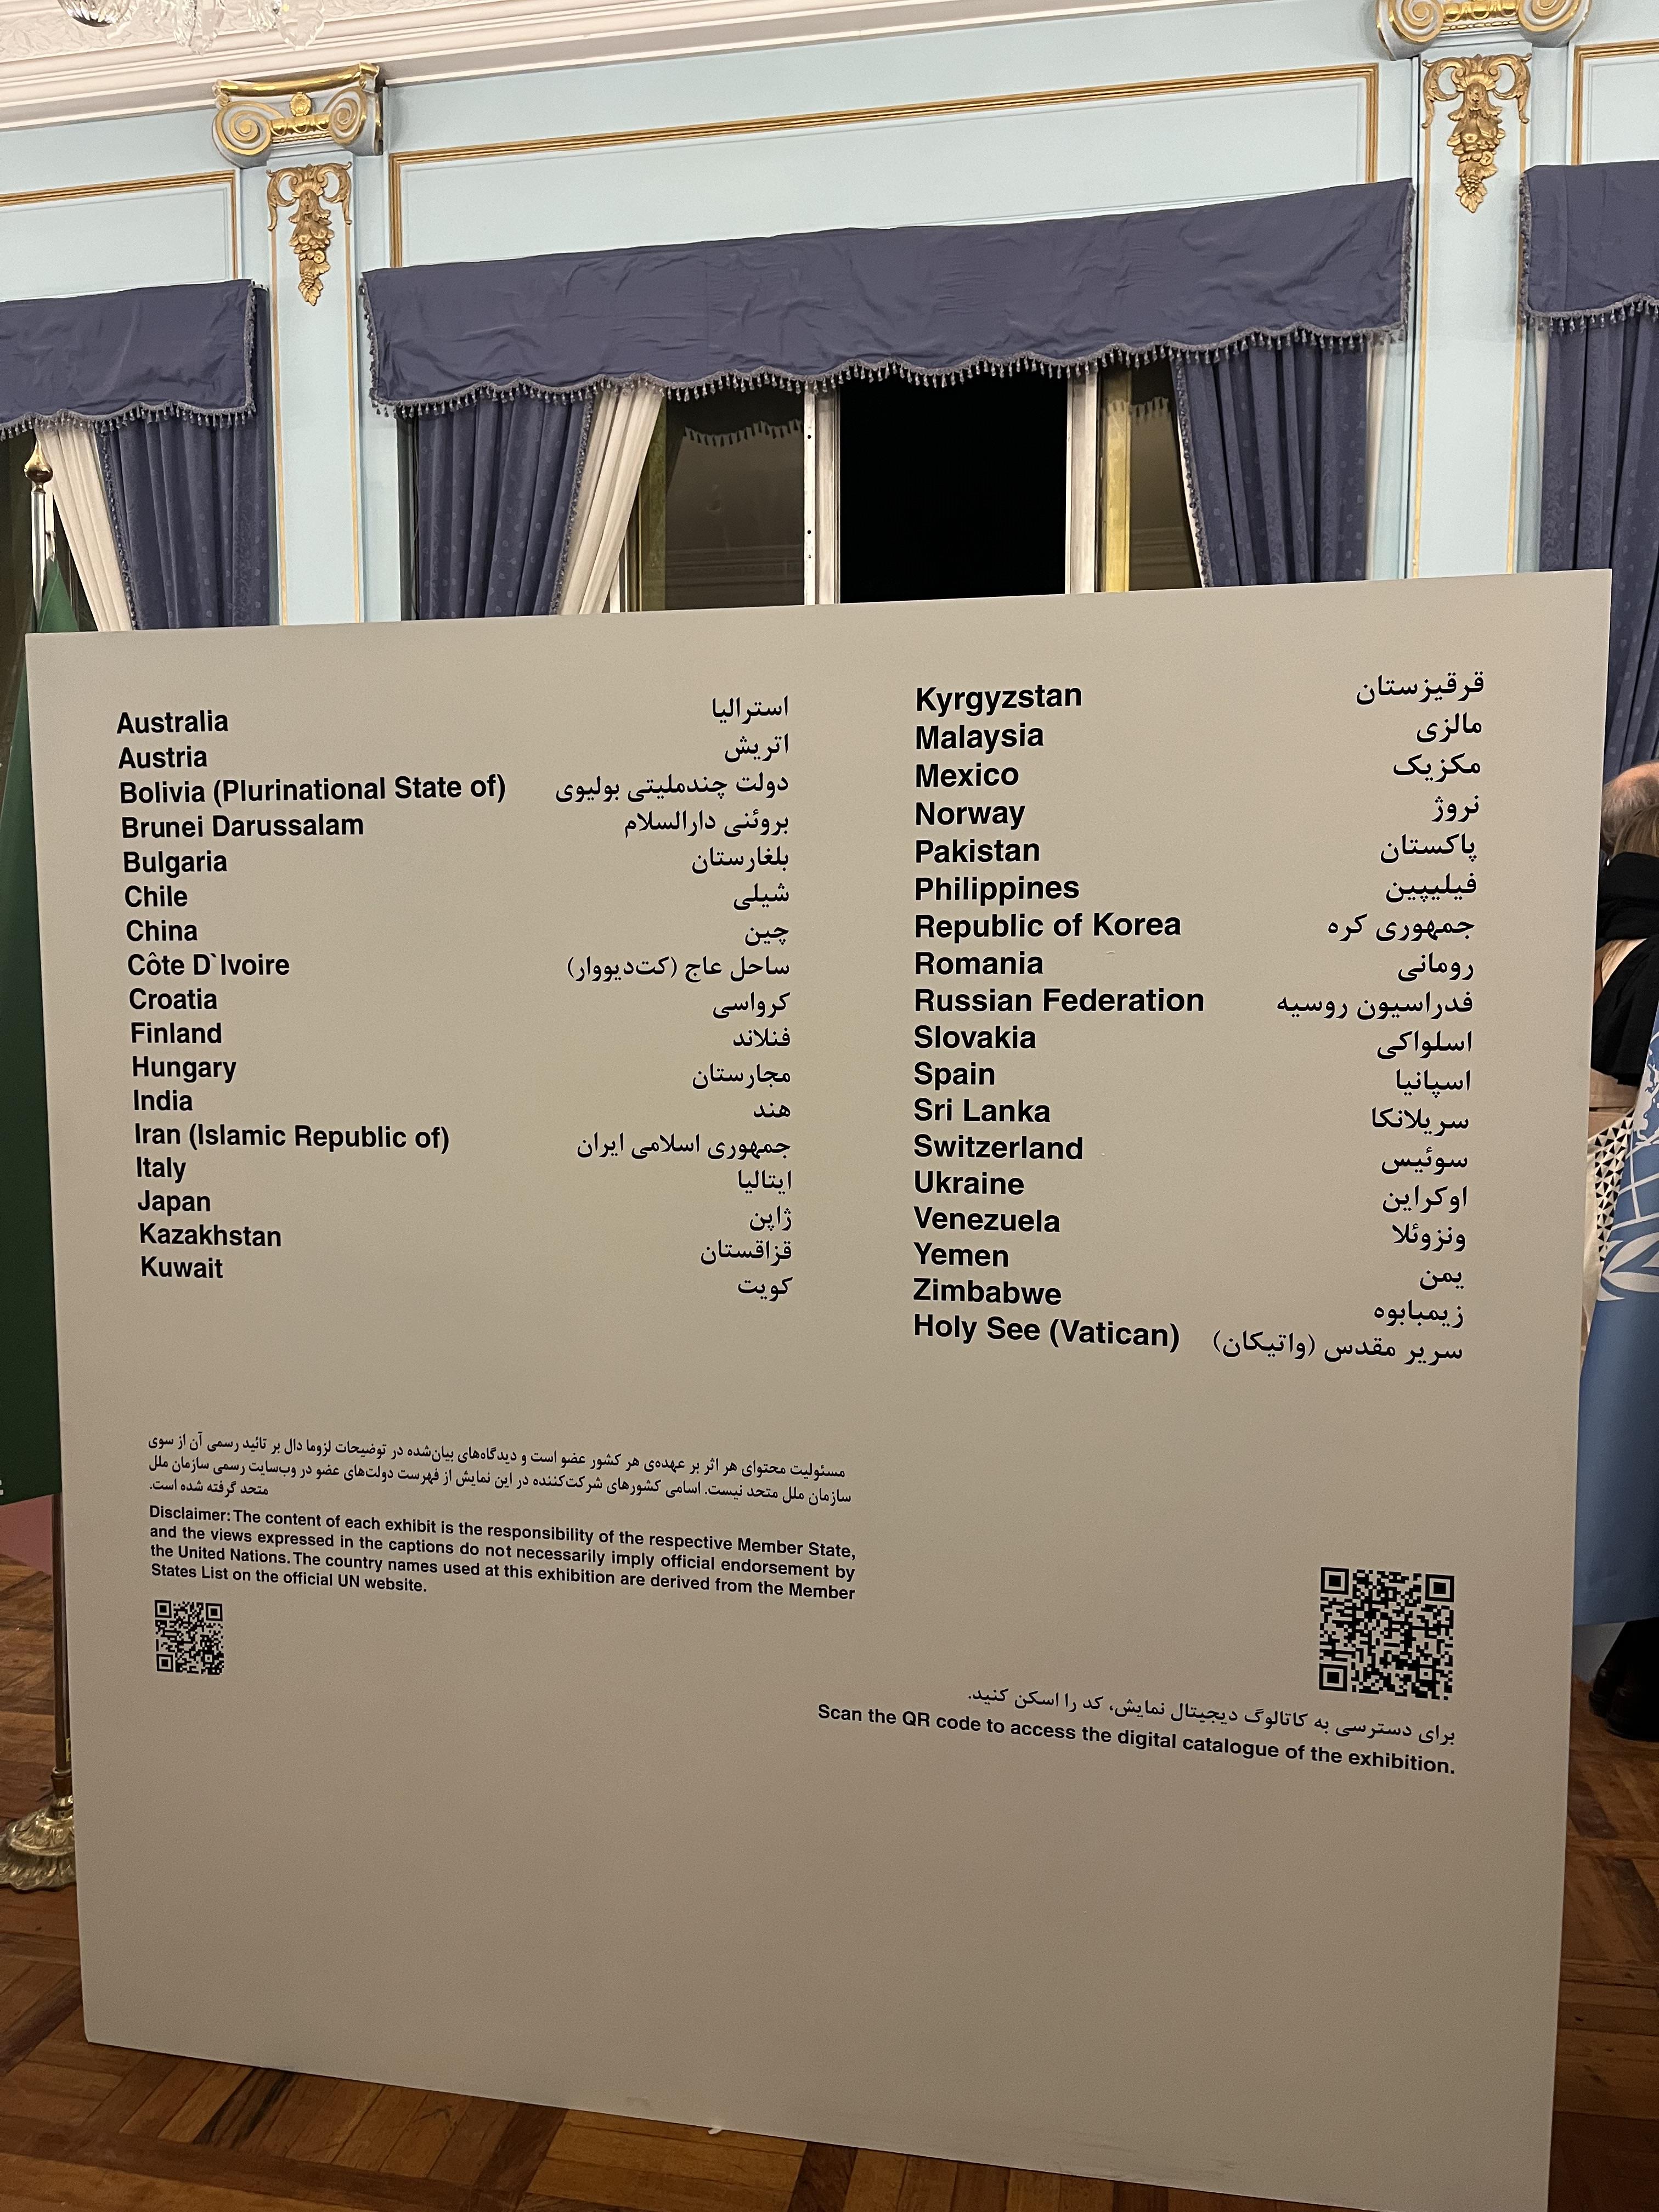 Embassy in Tehran's participation in a UN exhibition entitled "Humanity. Solidarity. One Planet."